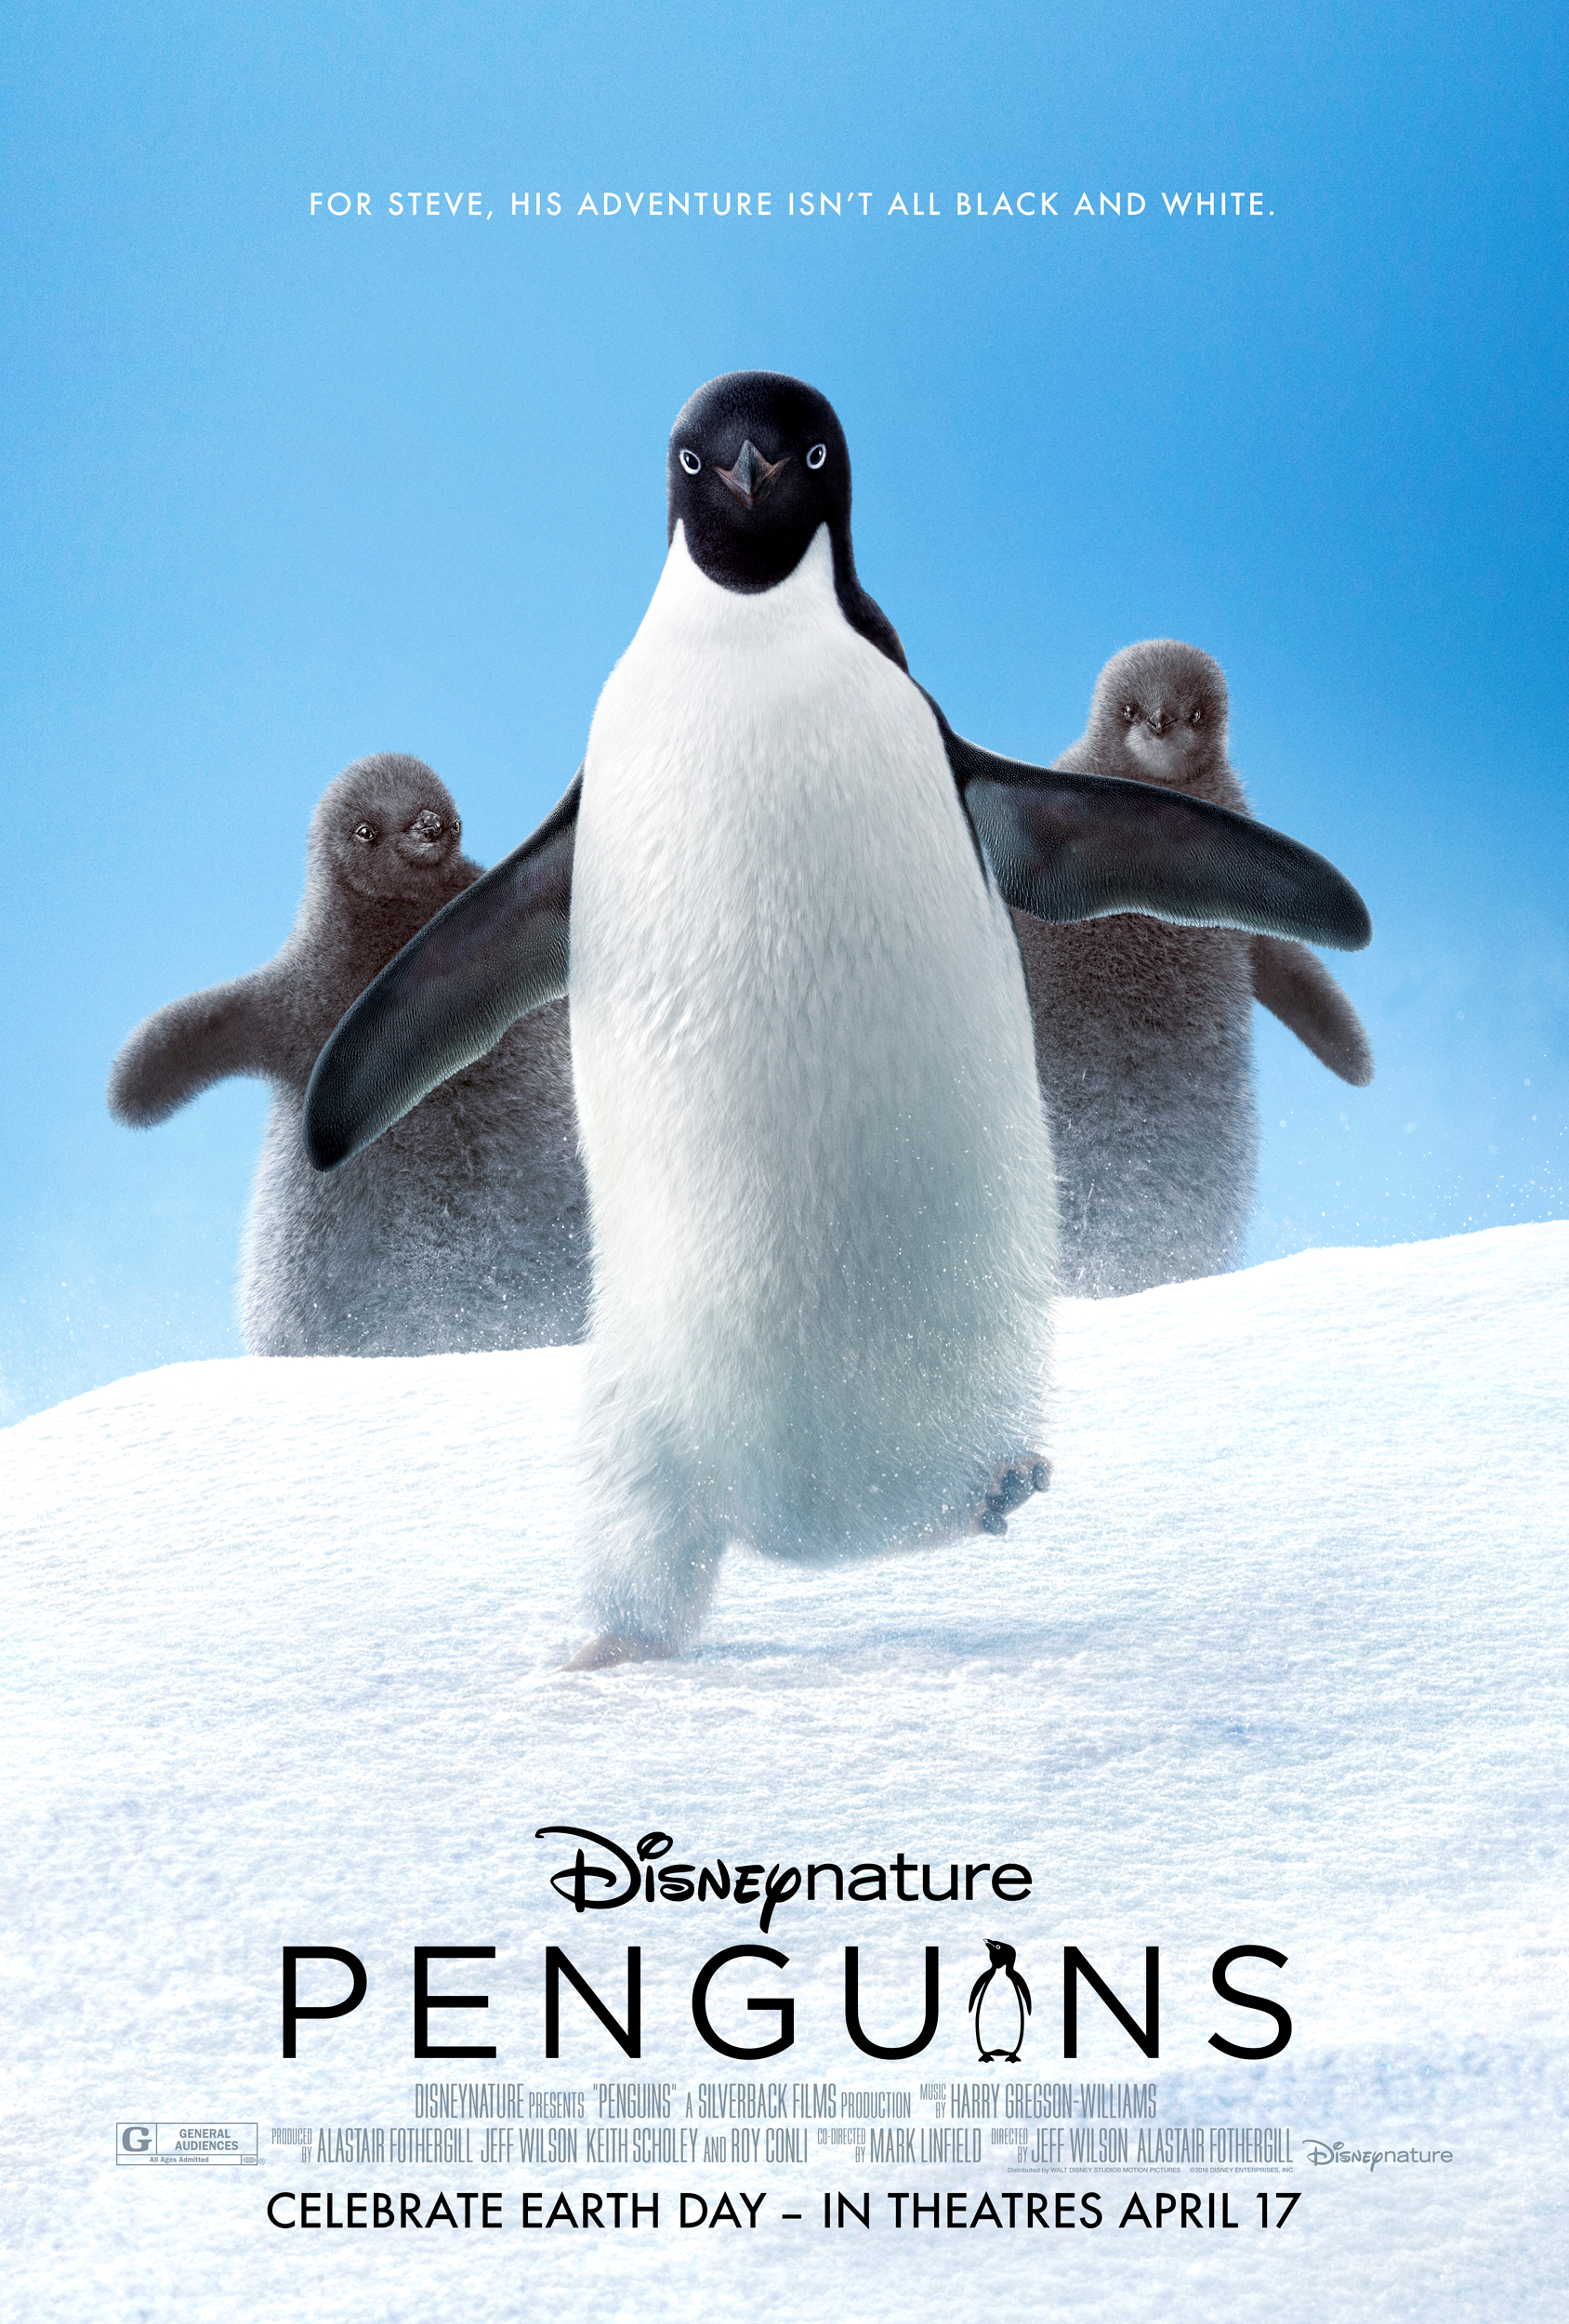 Penguins is a charming film and one of the Disney movies coming out in 2019!